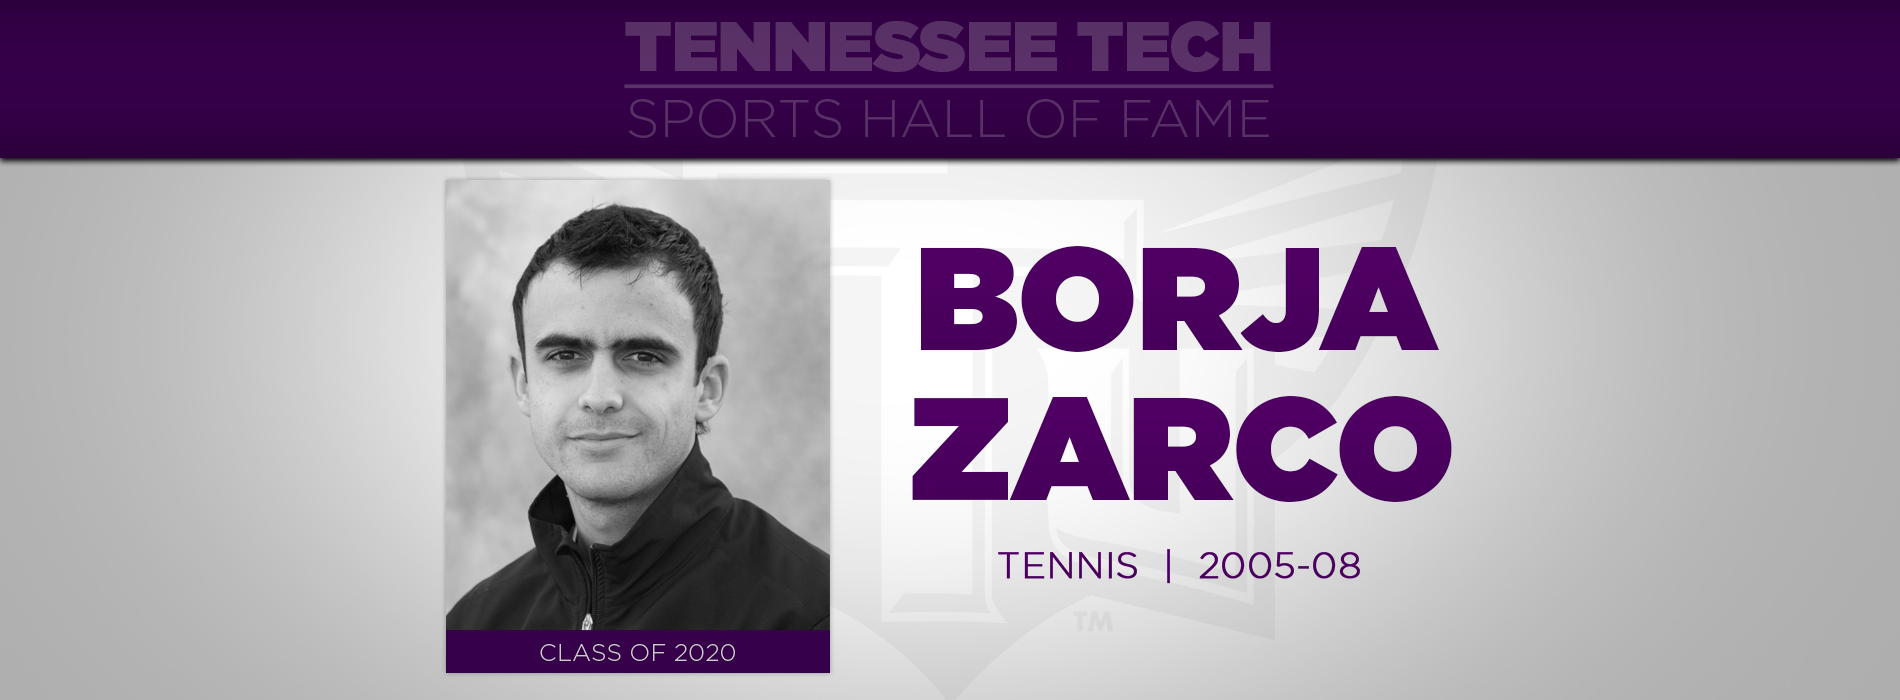 Zarco to be inducted into TTU Sports Hall of Fame Friday, Nov. 12